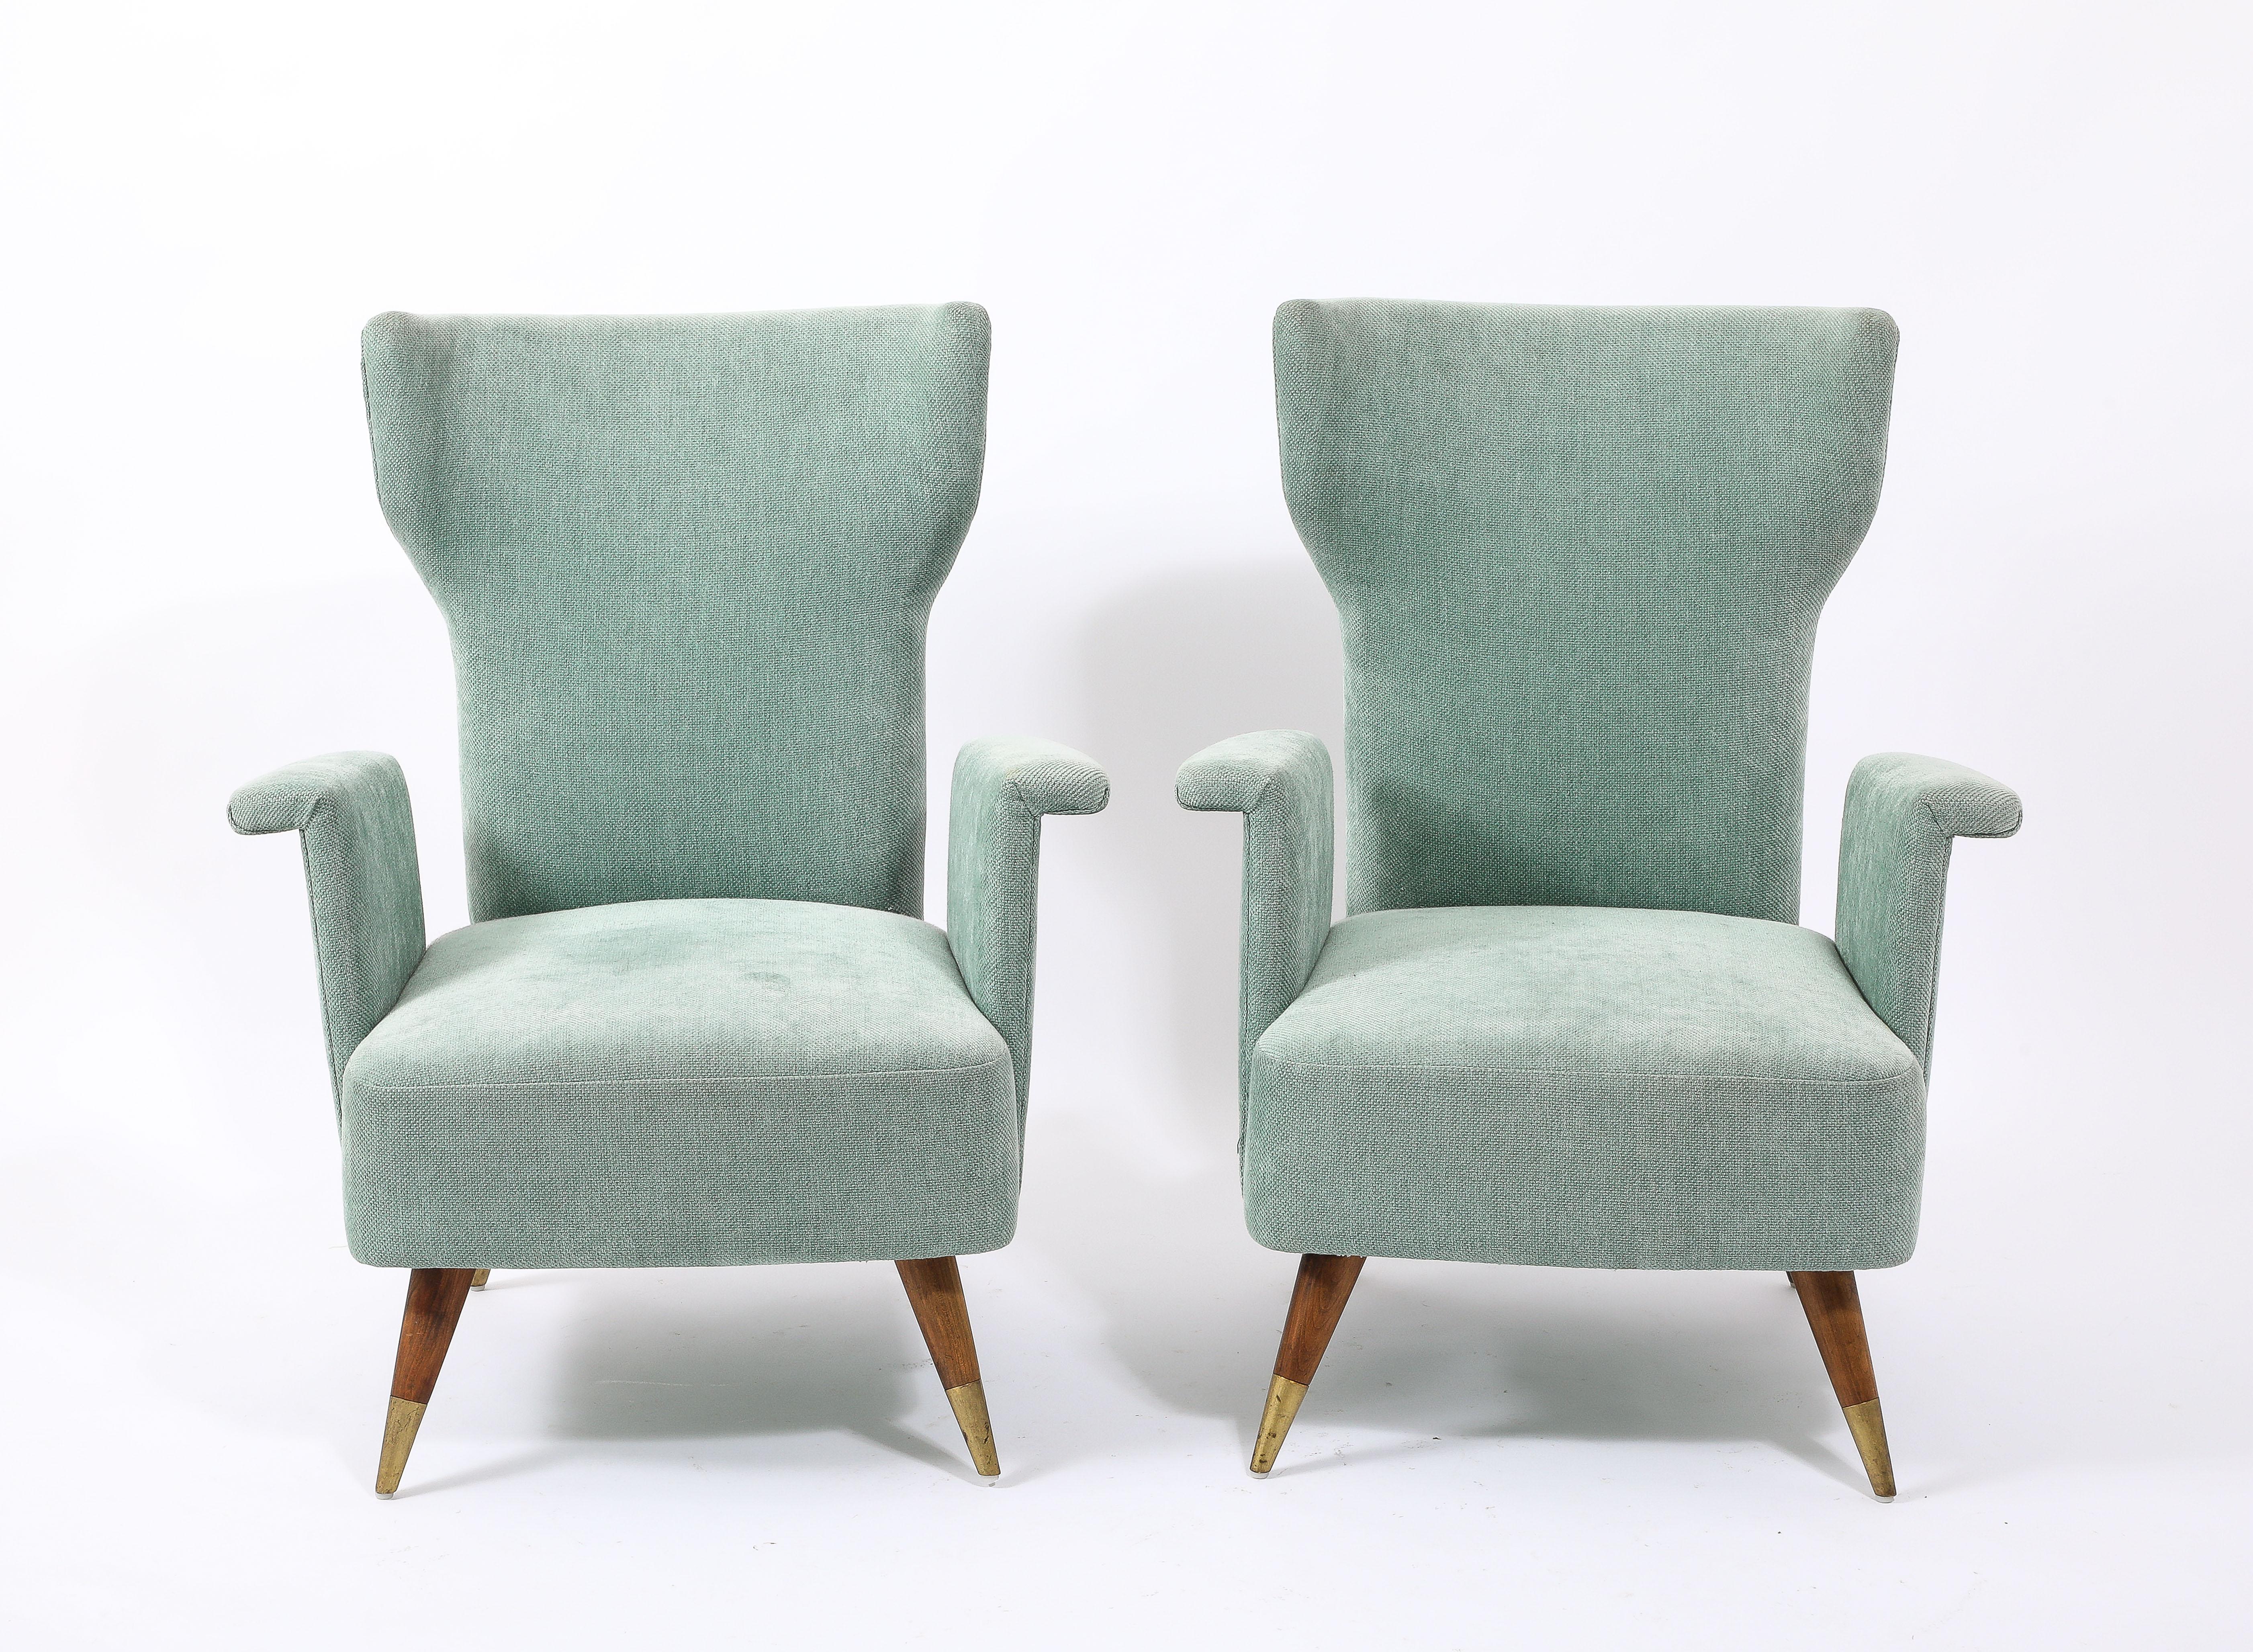 Pale Blue Tall Italian Wingchairs, Italy 1950's For Sale 2